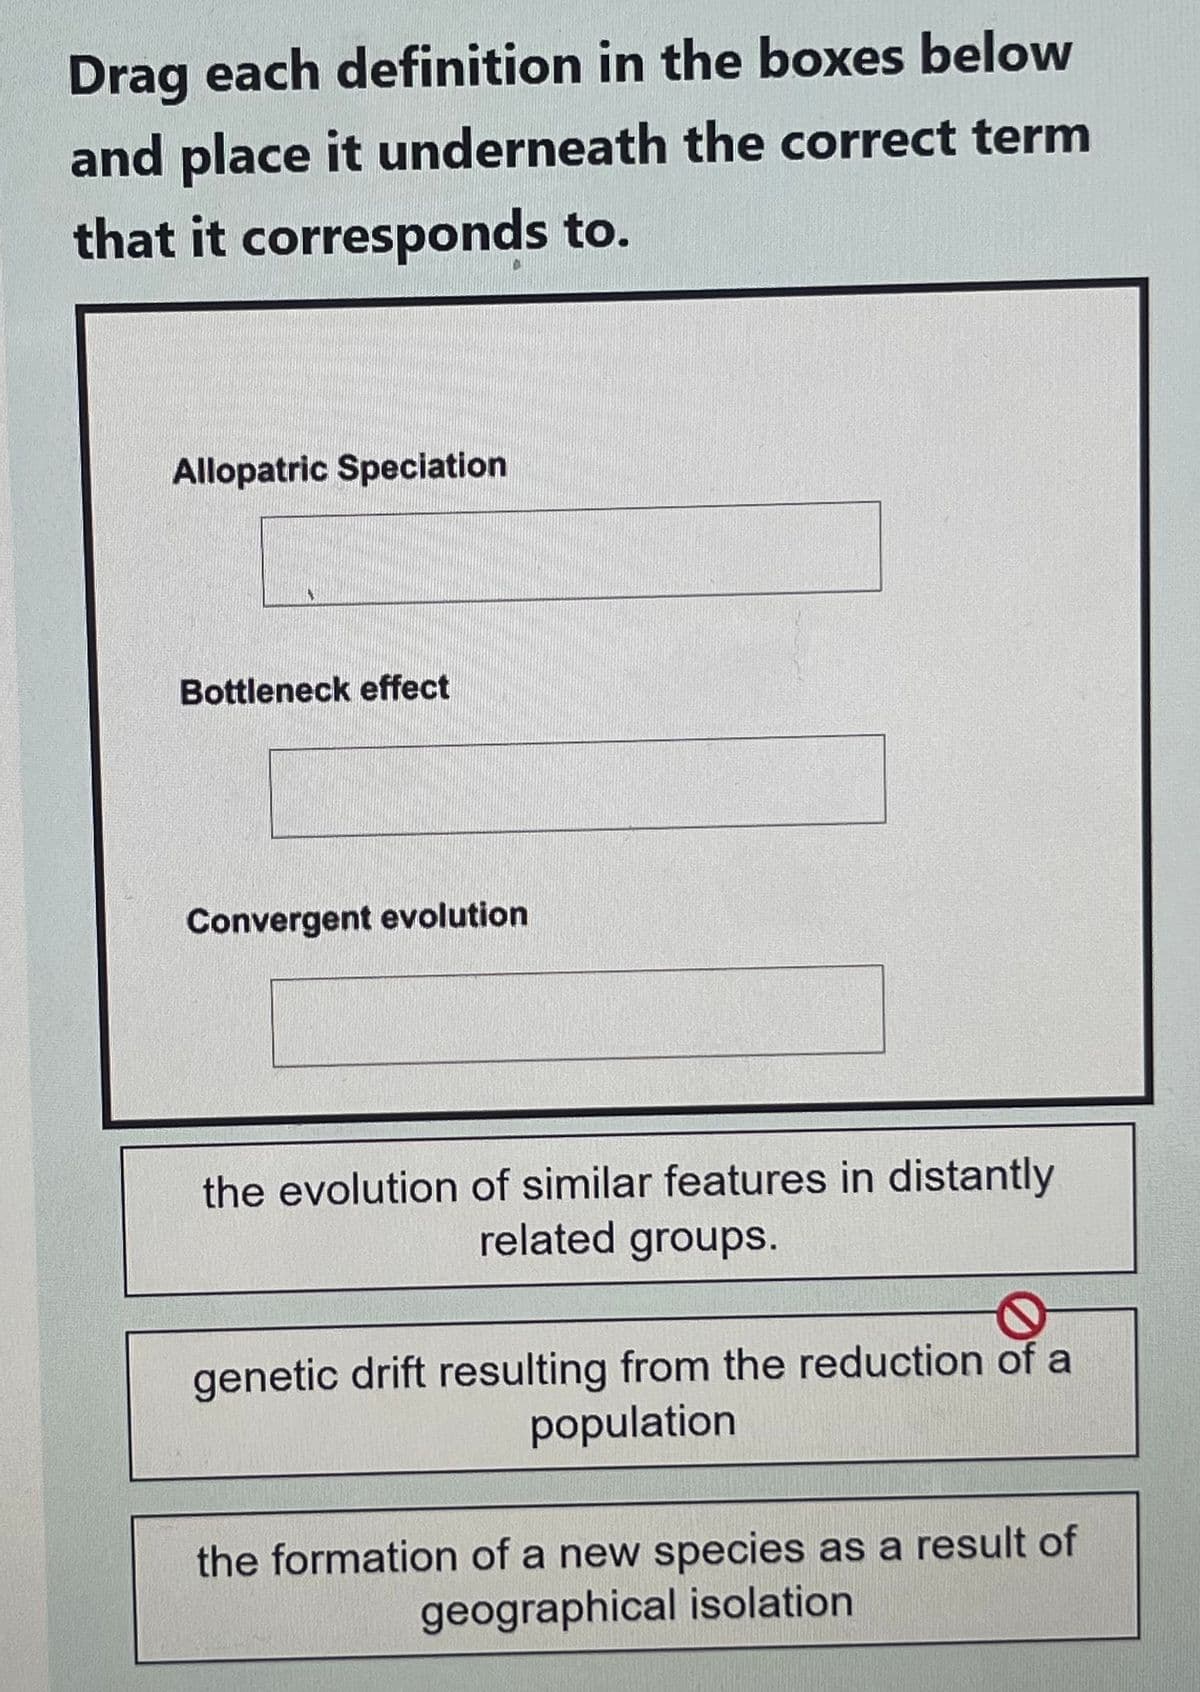 Drag each definition in the boxes below
and place it underneath the correct term
that it corresponds to.
Allopatric Speciation
Bottleneck effect
Convergent evolution
the evolution of similar features in distantly
related groups.
genetic drift resulting from the reduction of a
population
the formation of a new species as a result of
geographical isolation